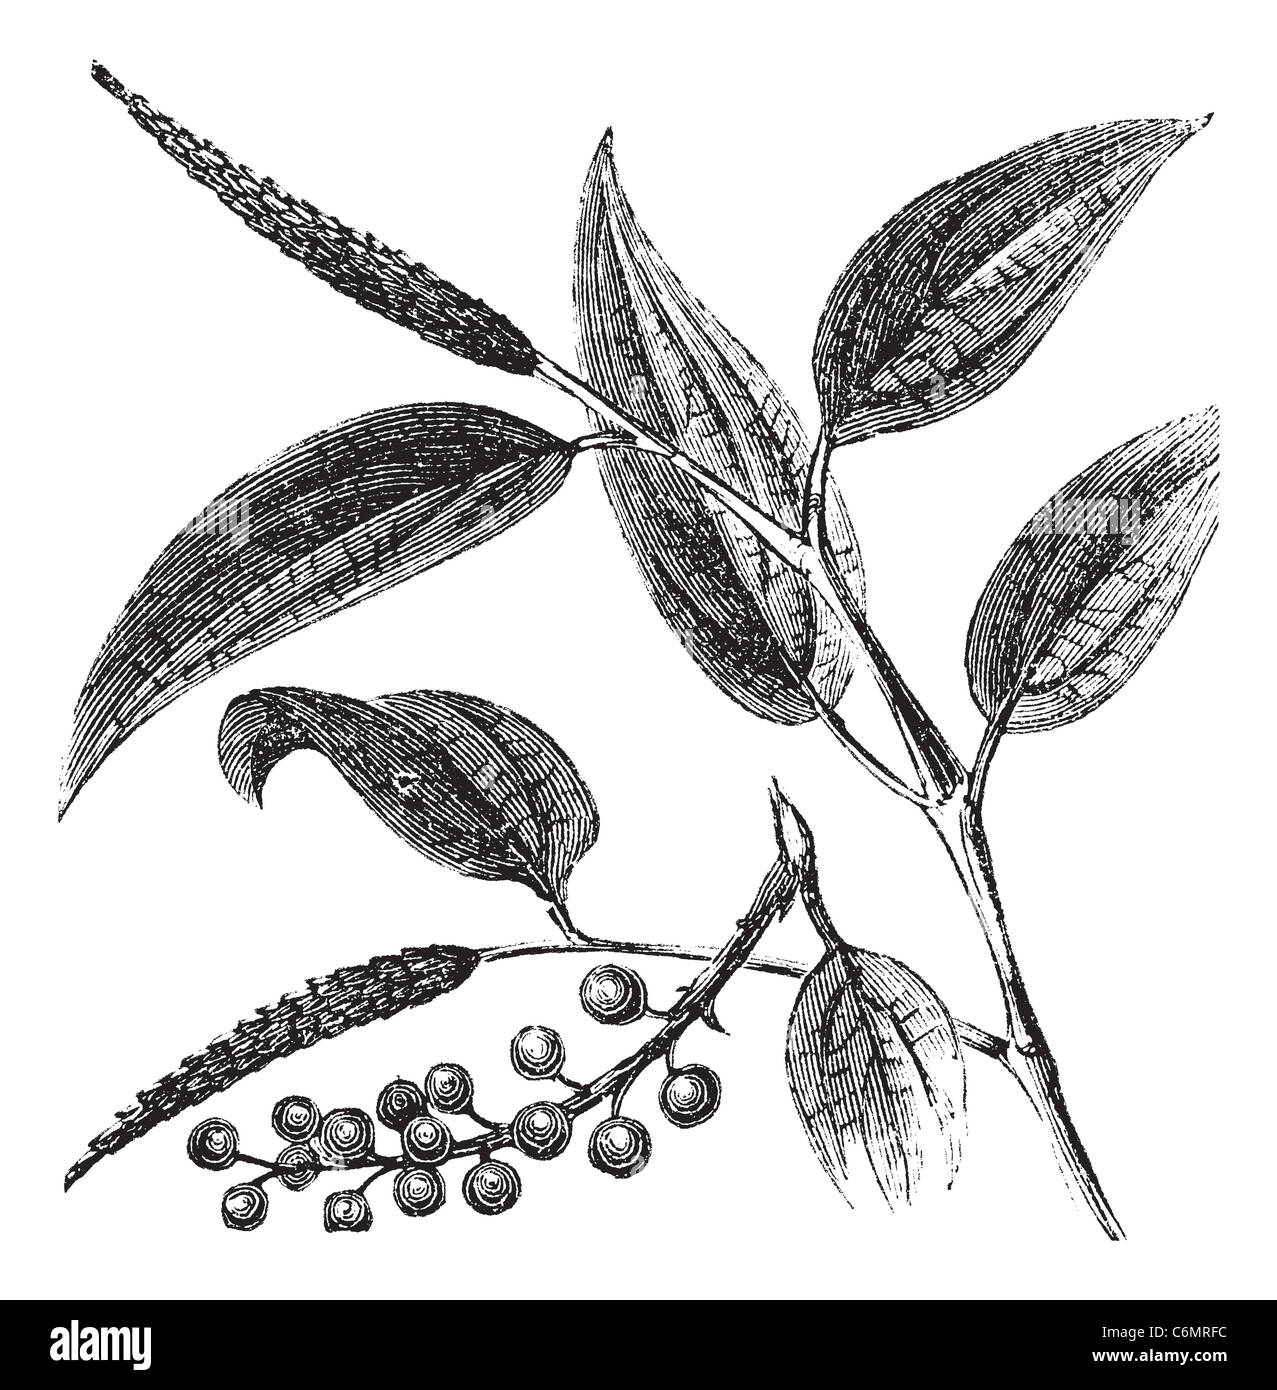 Cubeb or Tailed Pepper or Java Pepper or Piper cubeba, vintage engraving. Old engraved illustration of a Cubeb plant showing berries. Stock Photo